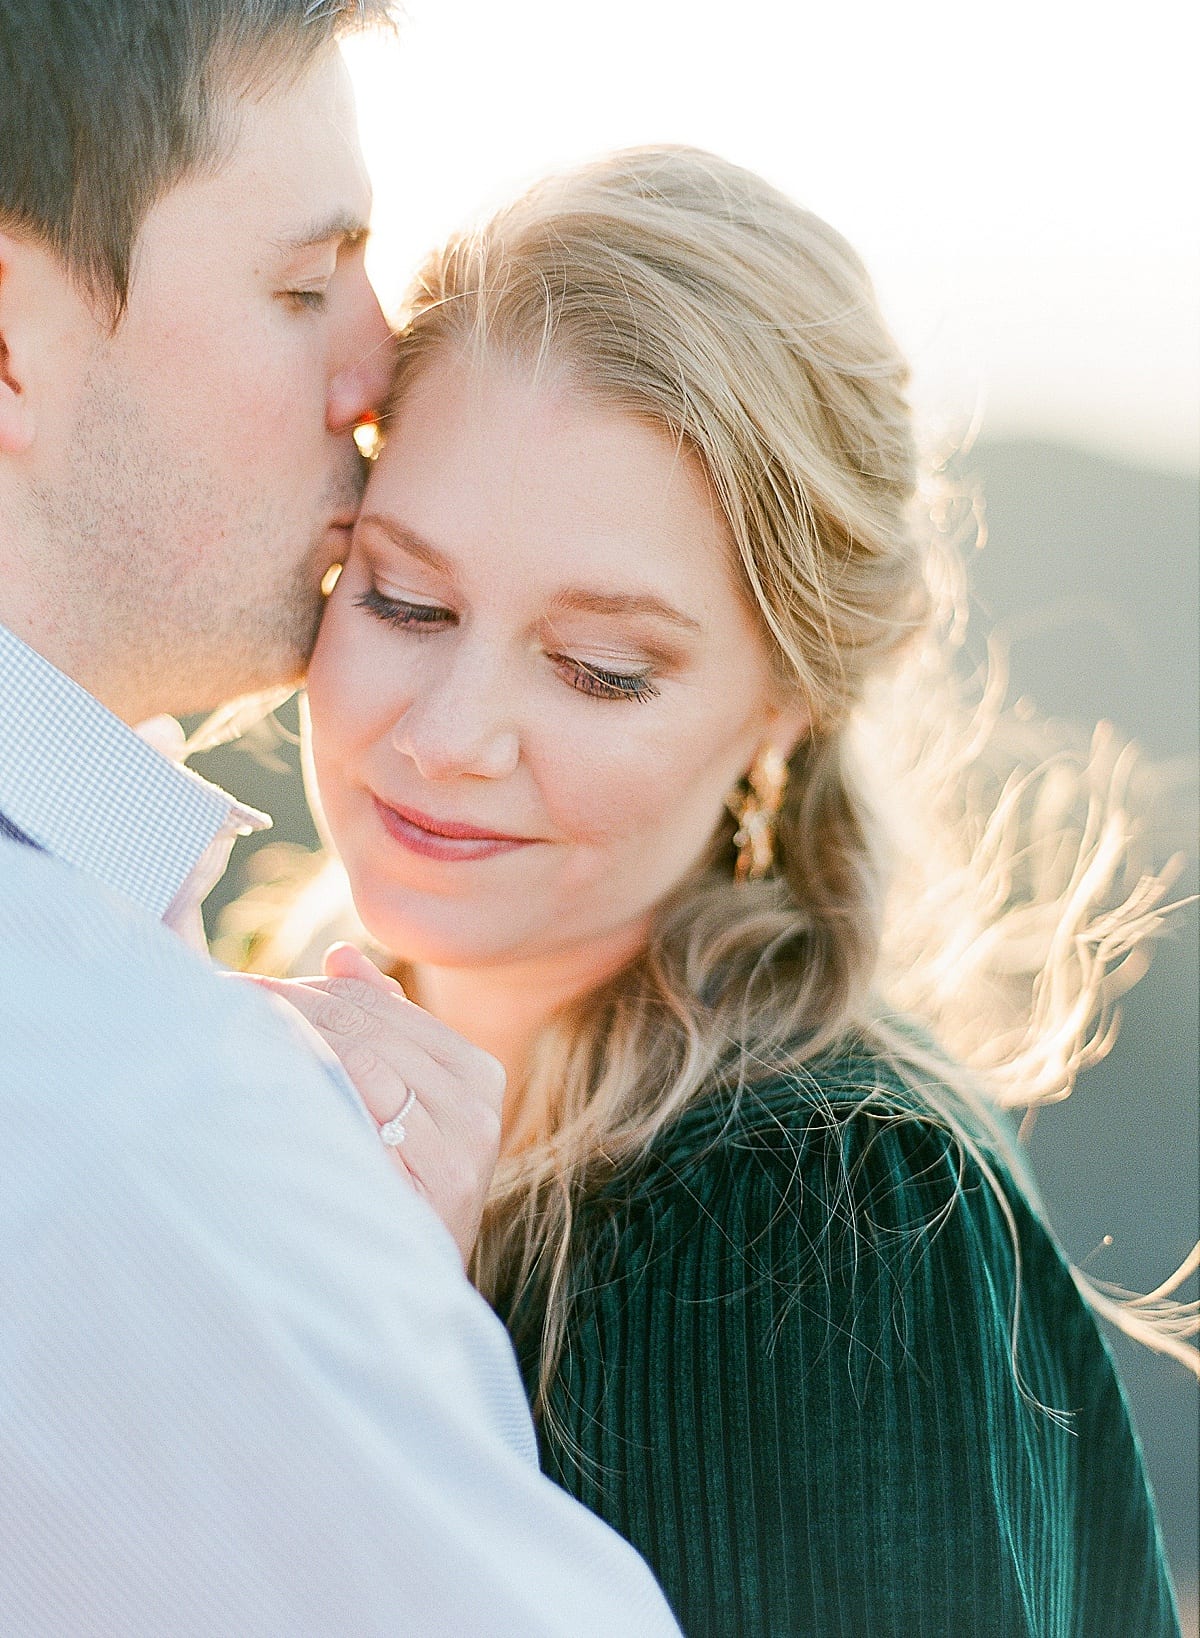 Mountaintop Engagement Session Guy Kissing Girl on Temple Photo